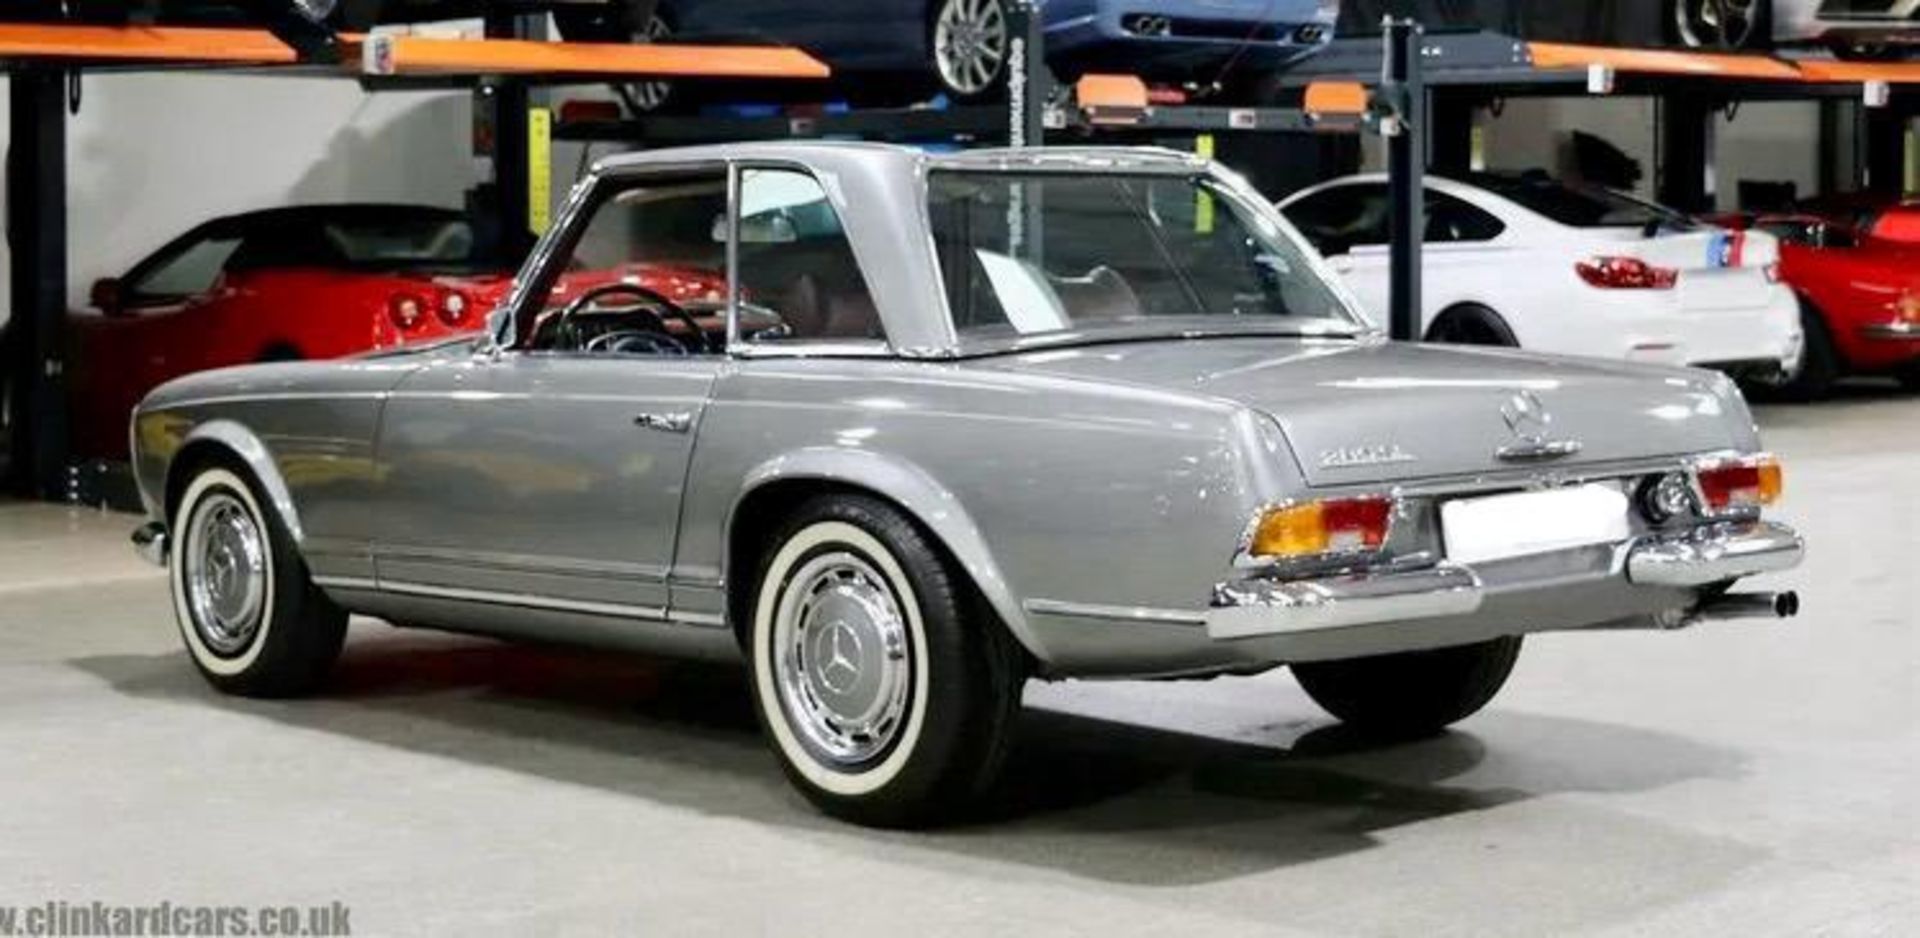 1969 MERCEDES-BENZ 280 SL, LHD MADE IN GERMANY, REGISTERED AND RESTORED IN DUBAI, CAR NOW IN THE UK - Image 3 of 15